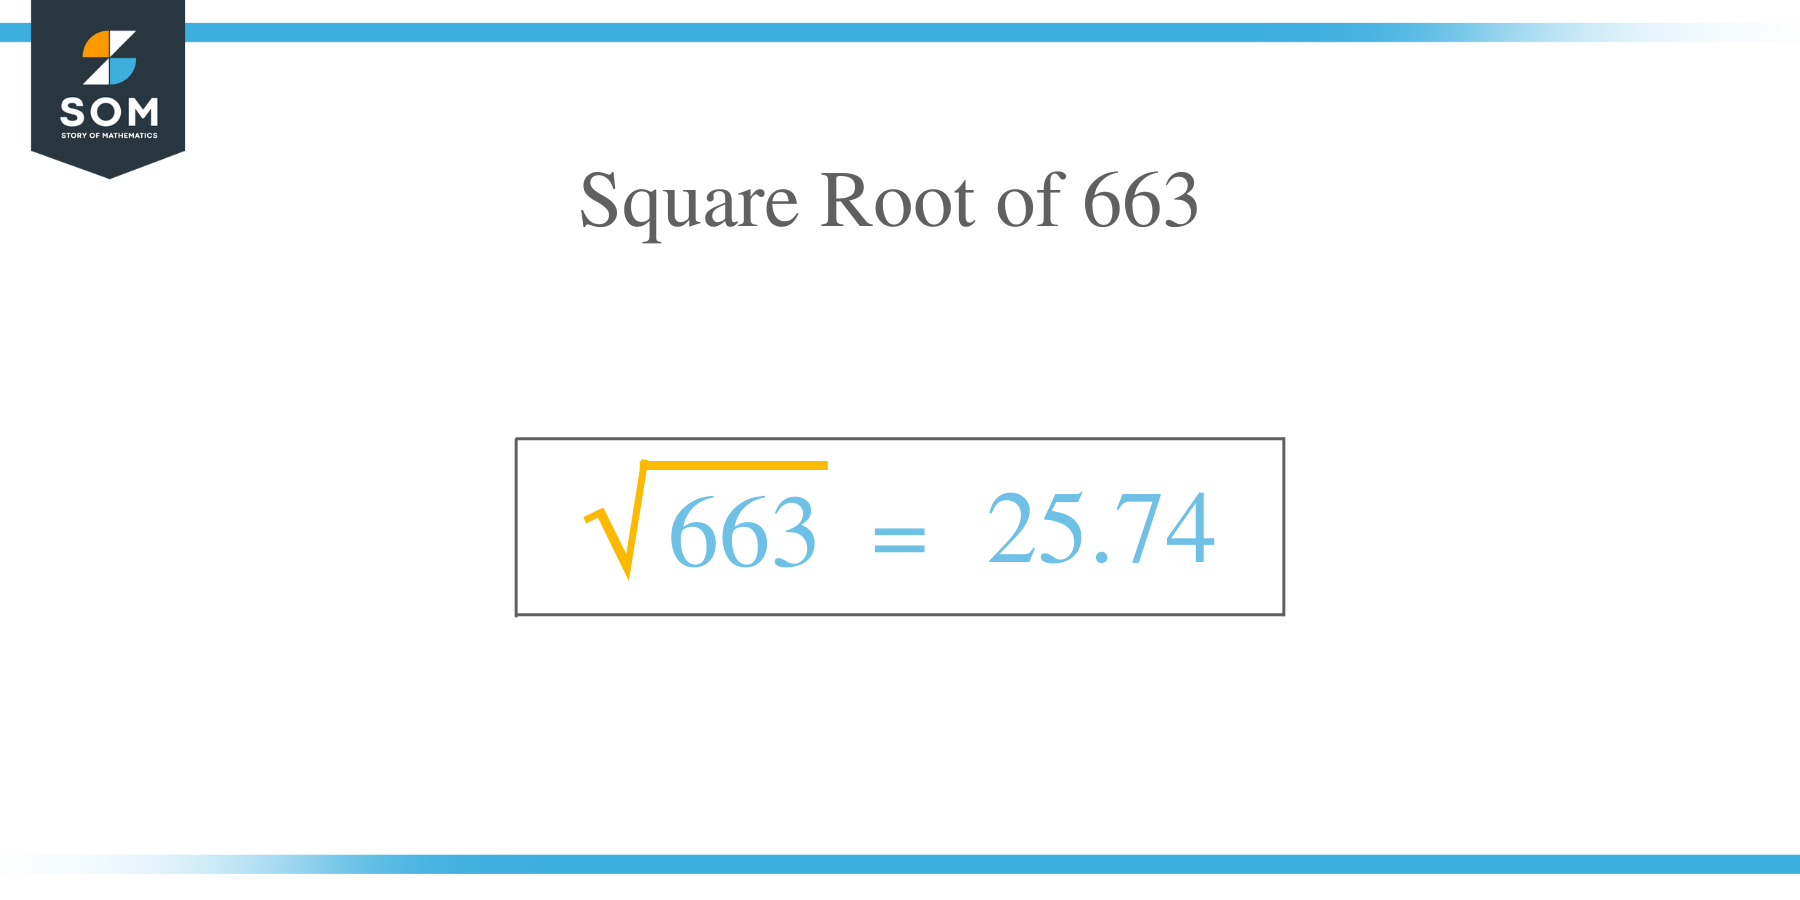 Square Root of 663